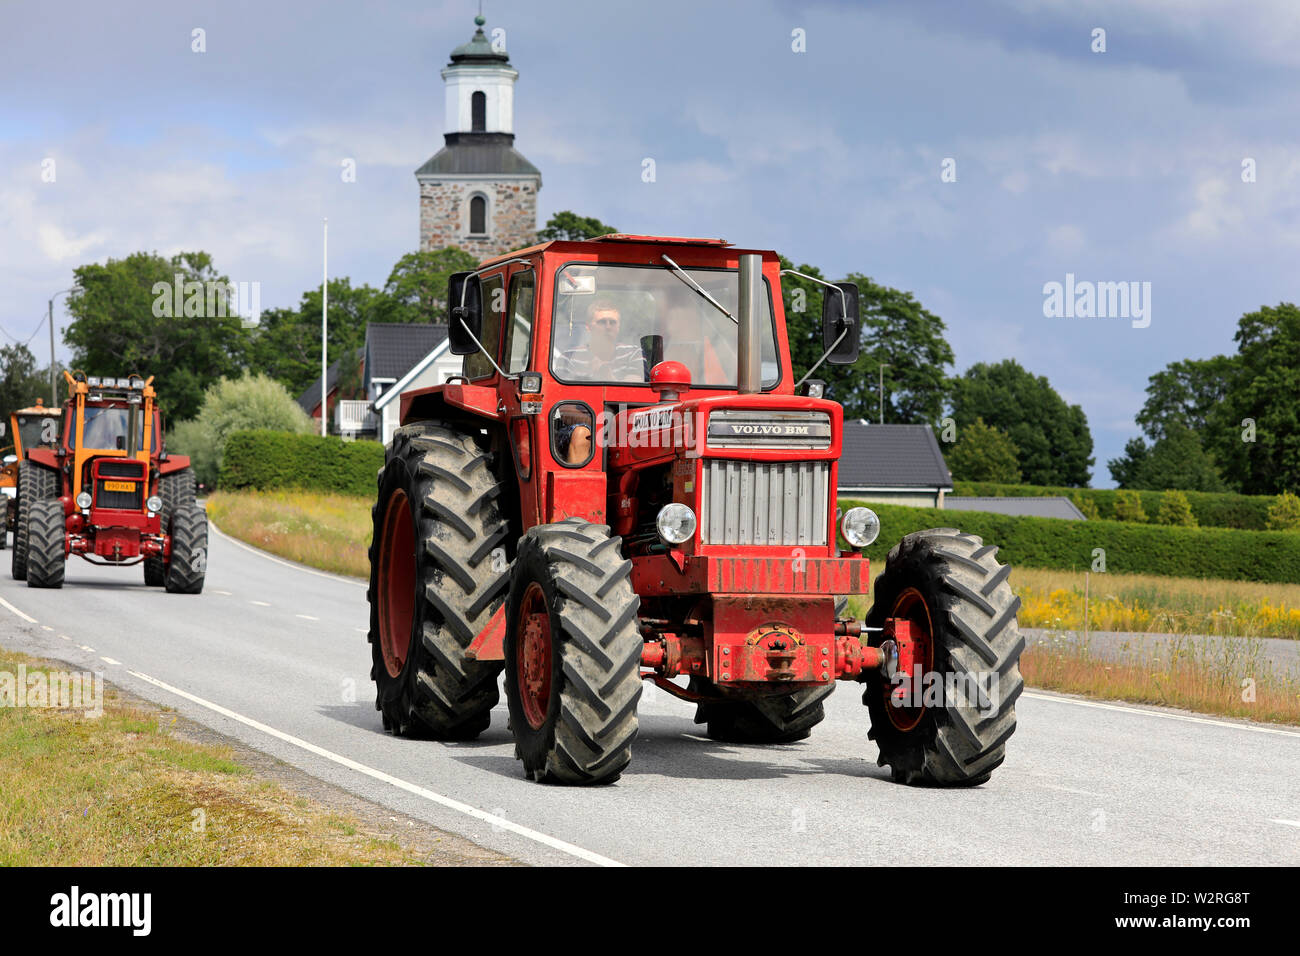 Kimito, Finland. July 6, 2019. Red Volvo BM 814 tractor on Kimito Tractorkavalkad, annual vintage tractor parade. The 814 was introduced in 1969. Stock Photo